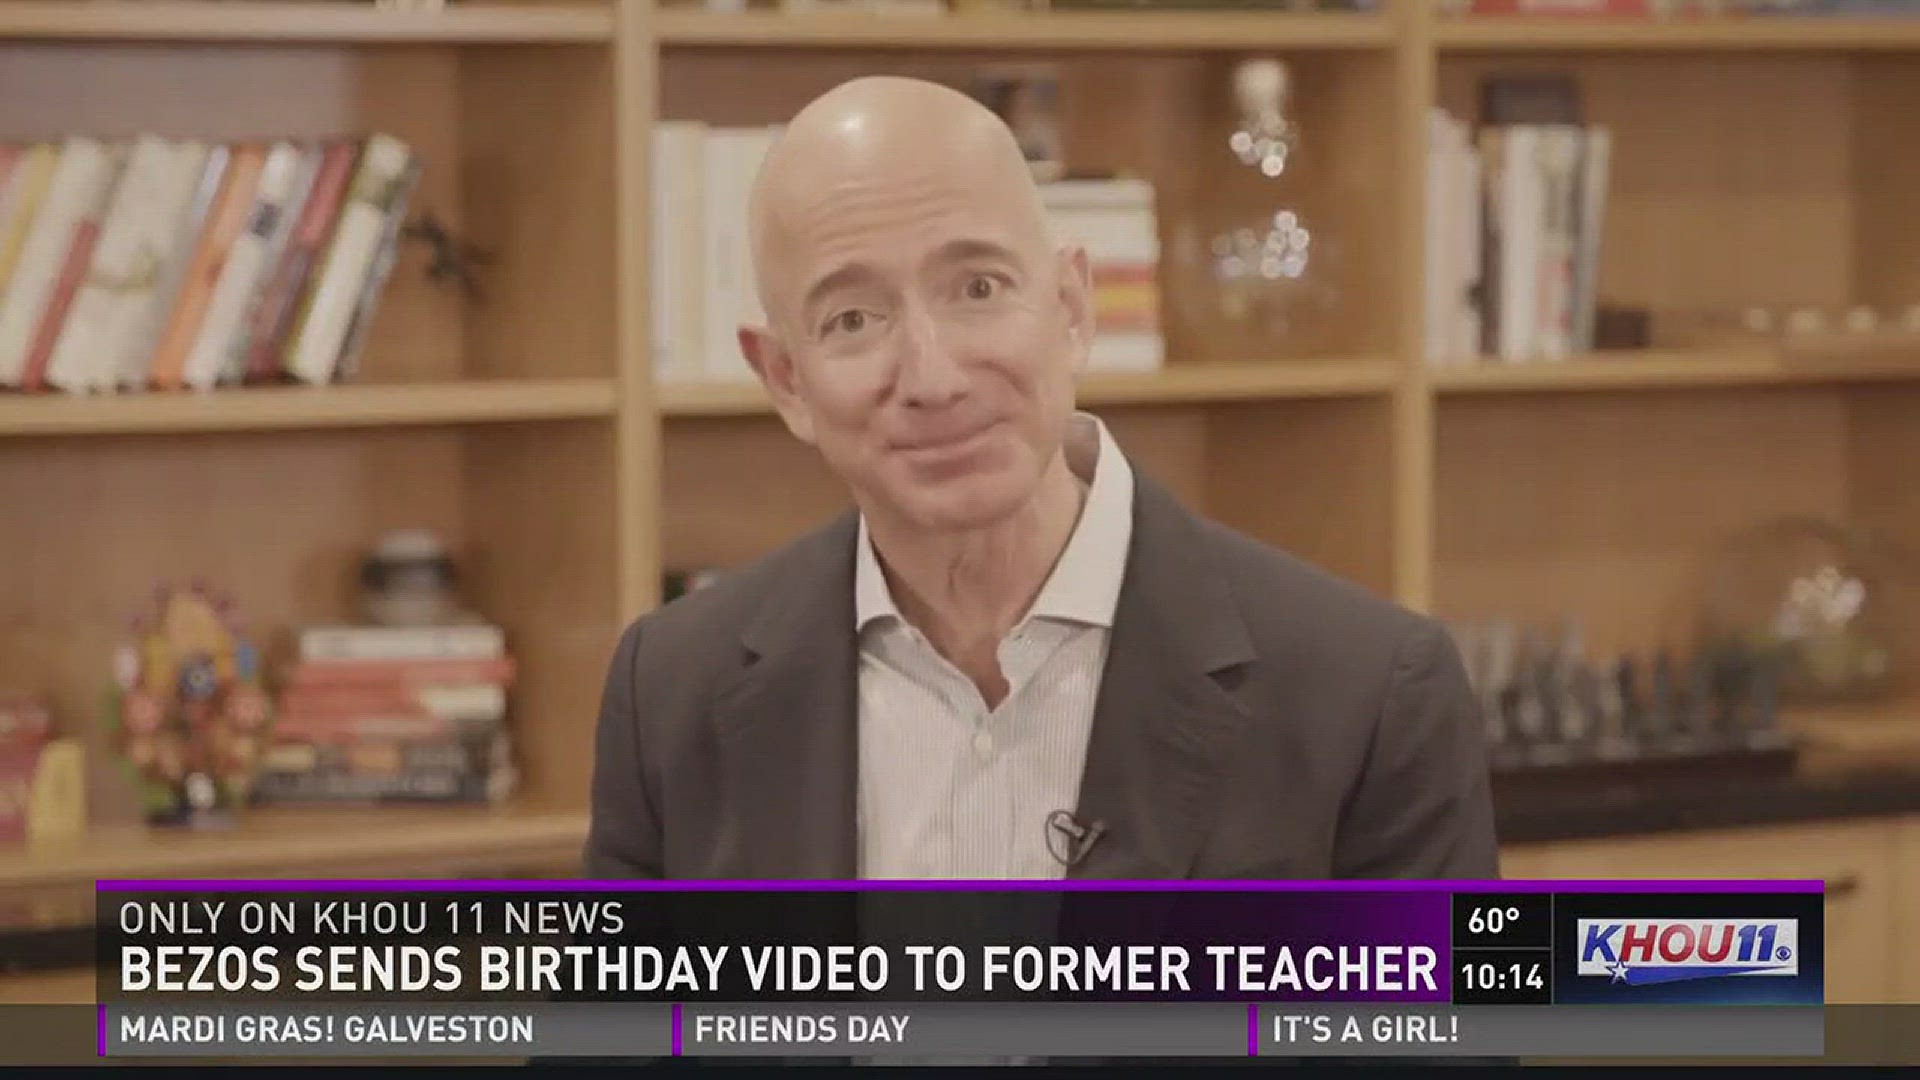 In a sweet video message, Jeff Bezos wished his 4th grade teacher a very happy birthday.